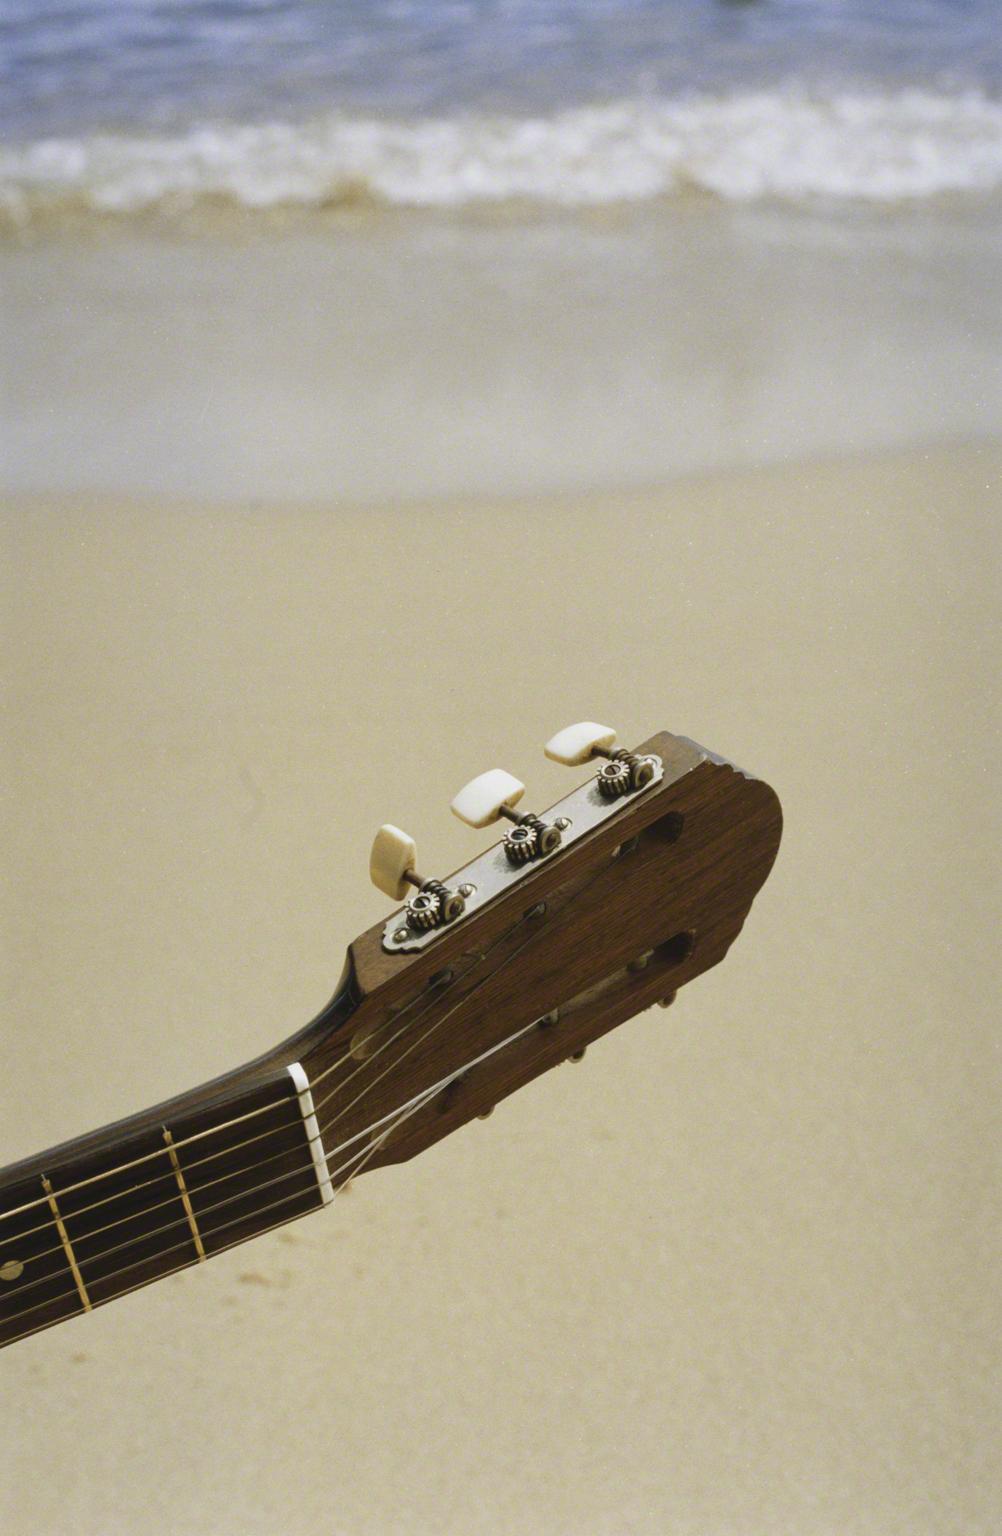 Color photograph of the headstock of an acoustic guitar with beach and ocean as background